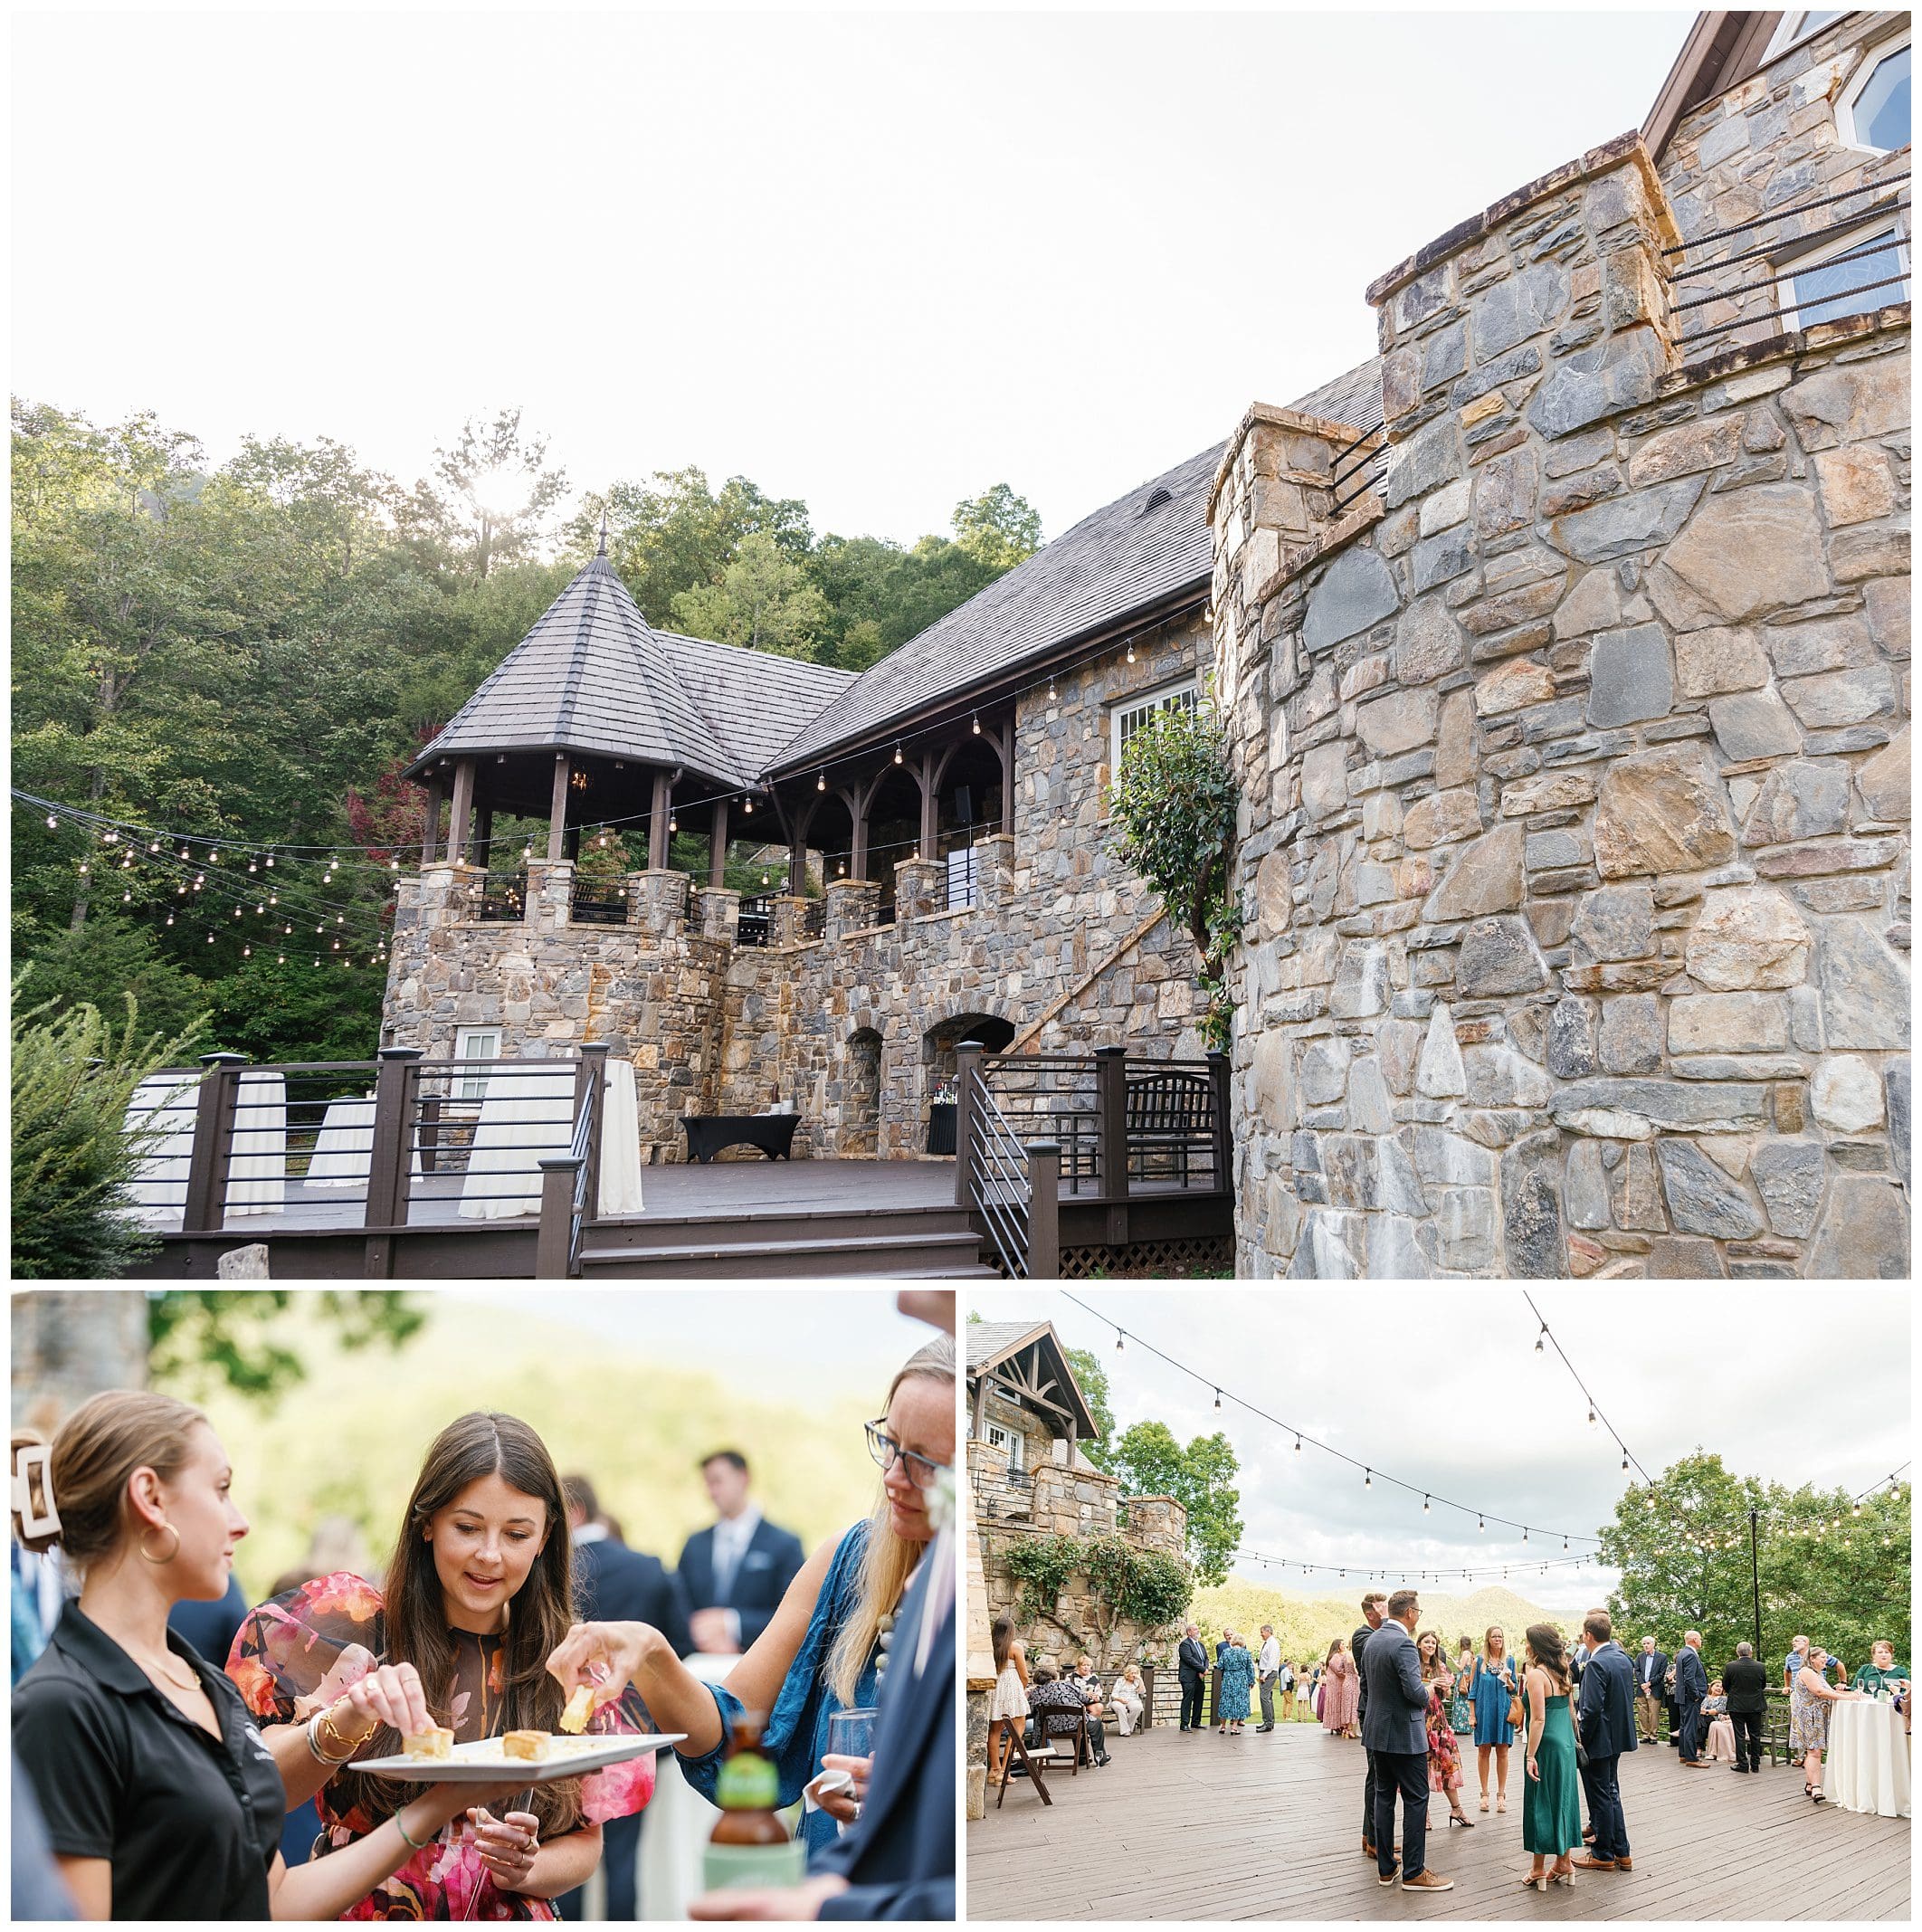 A wedding reception at a castle in the mountains.